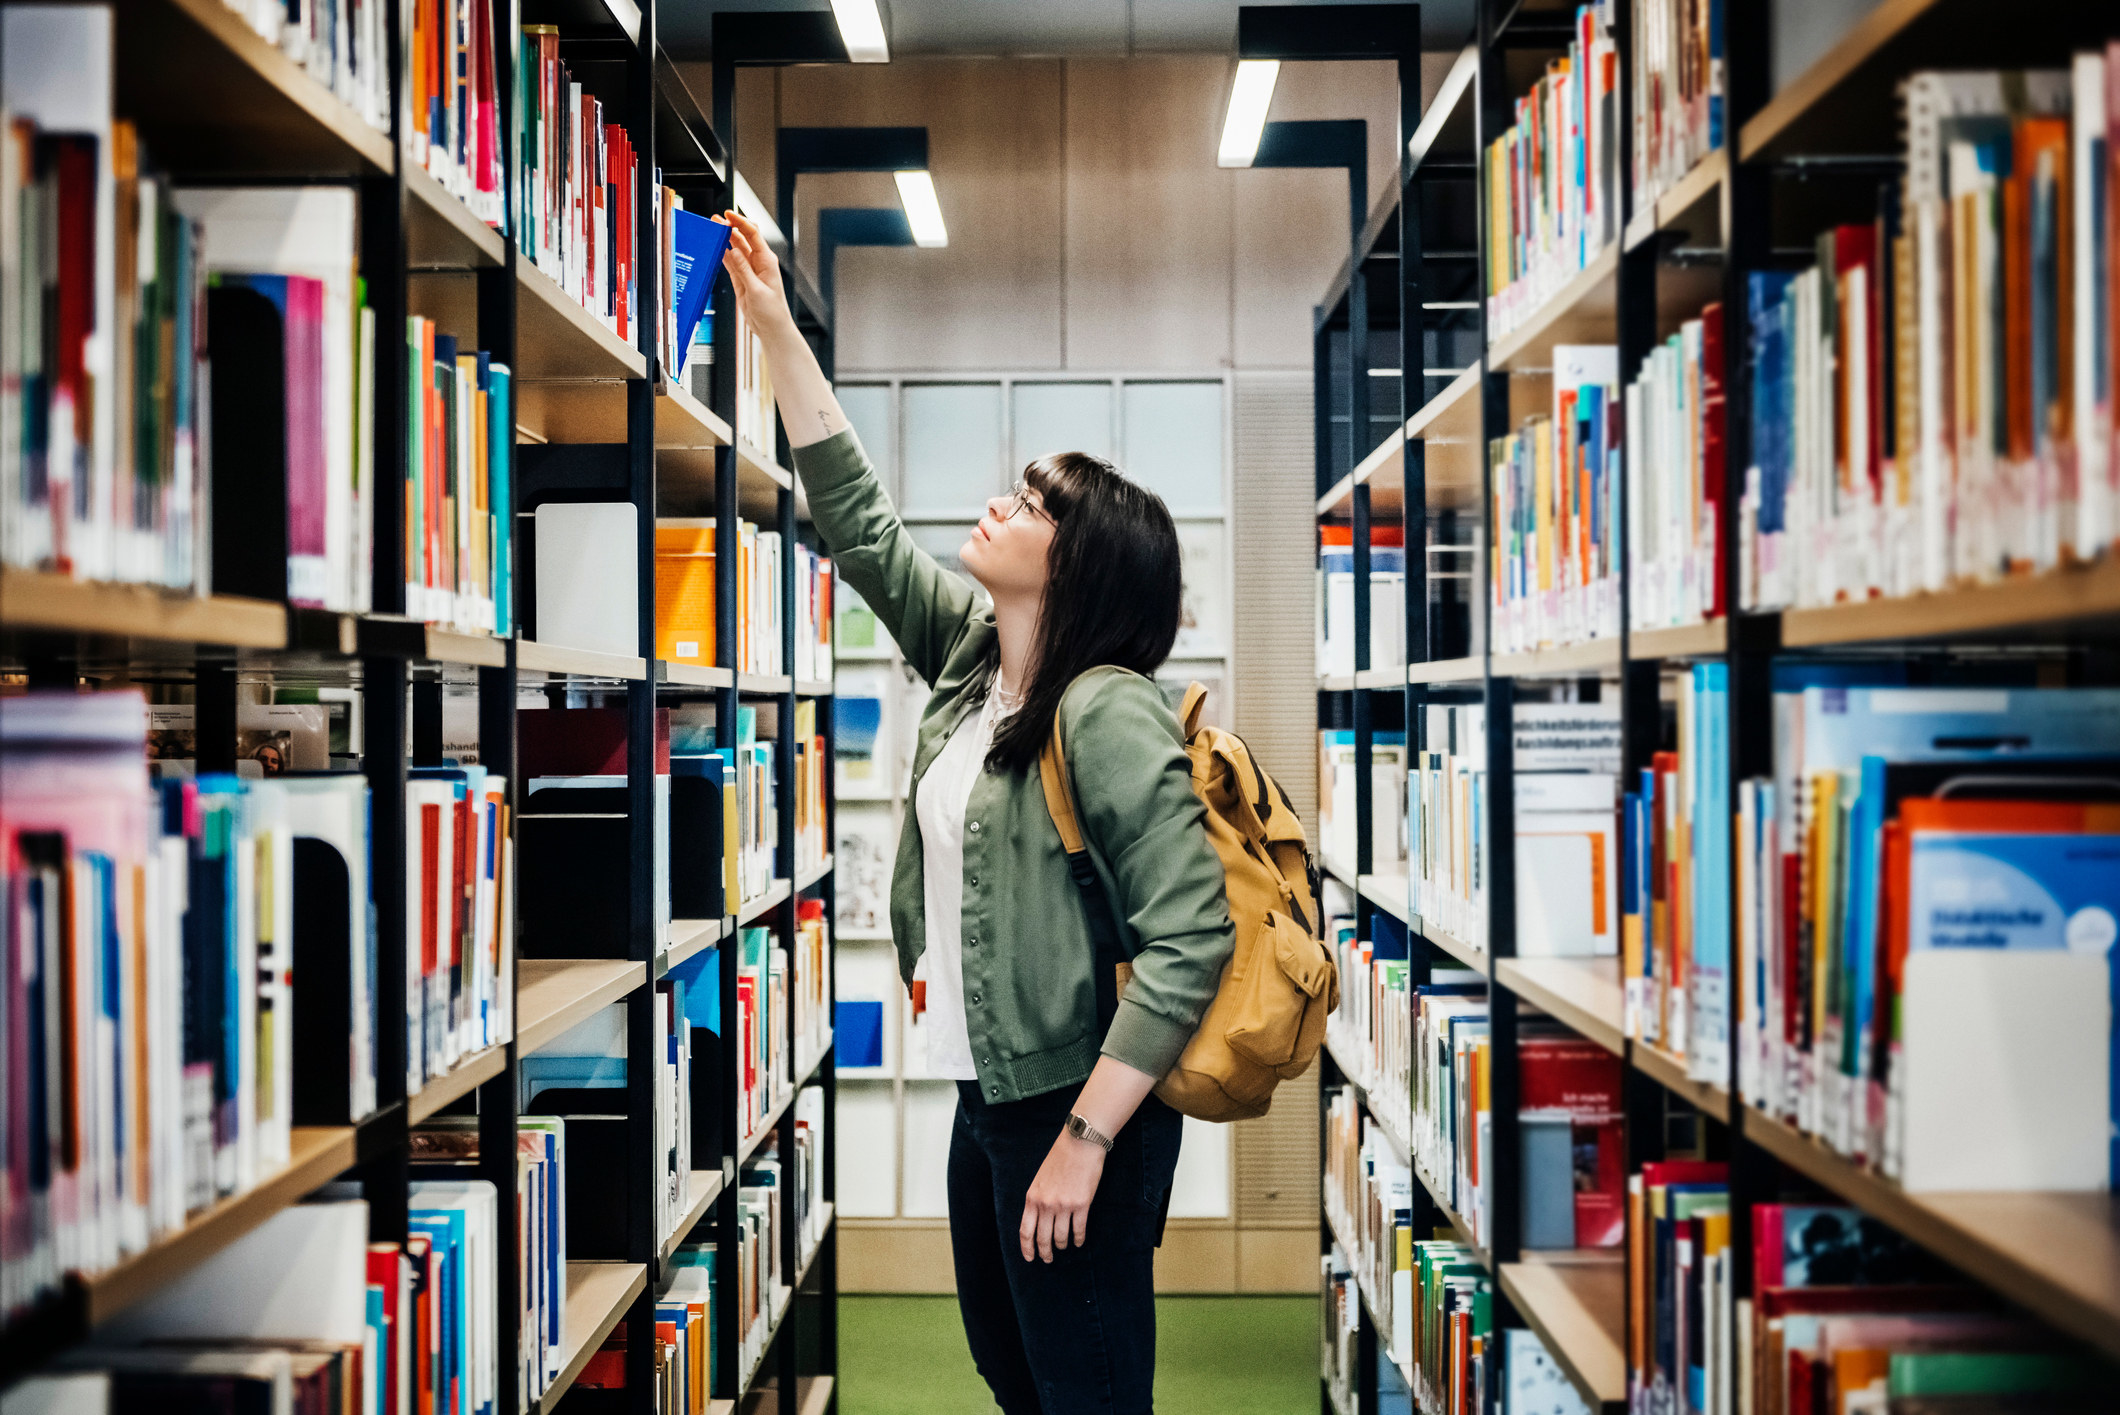 A young student reaching for a book from the top shelf in a public library